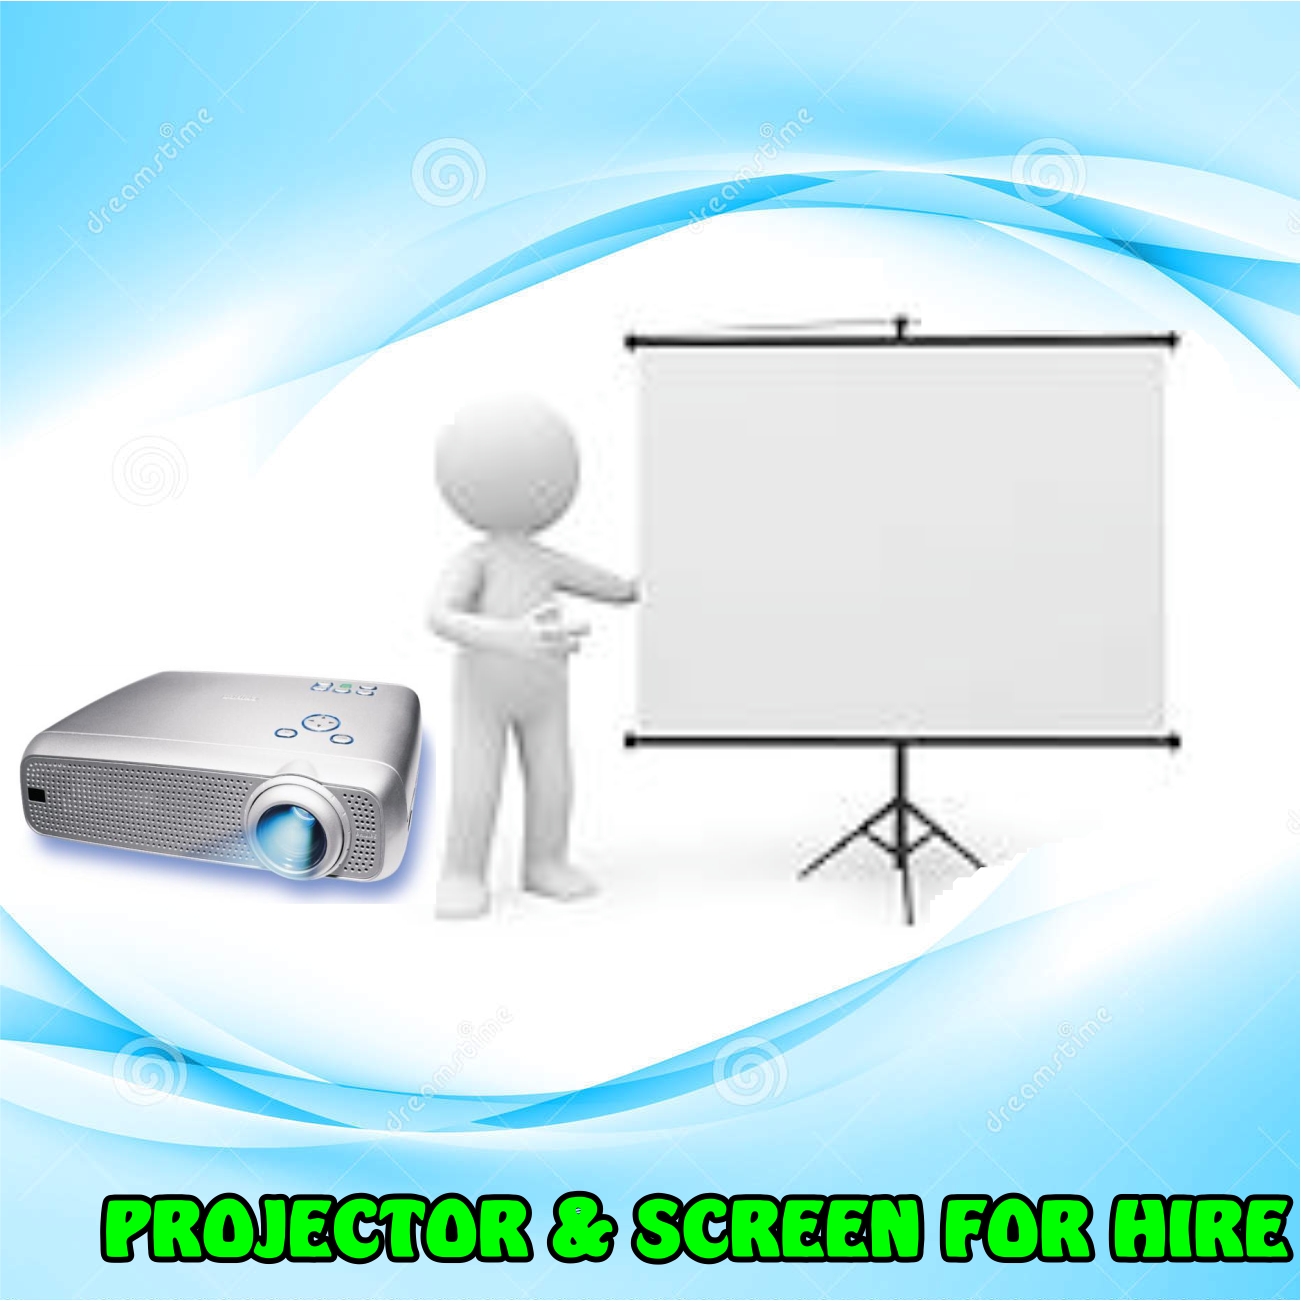 PROJECTOR AND SCREENS FOR HIRE IN DURBAN AUDIO VISUAL PROJECTOR AND SCREEN FOR HIRE IN DURBAN 0315072736 POWER POINT PROJECTIONS  0315072736 AT GRAVITY SOUND AND LIGHTING STORE IN DURBAN 0315072463 VISUAL PRESENTATION VIA BIG PROJECTION SCREEN AT GRAVITY DJ STORE EQUIPMENT PROJECTIONS FOR HIRE 0315072463